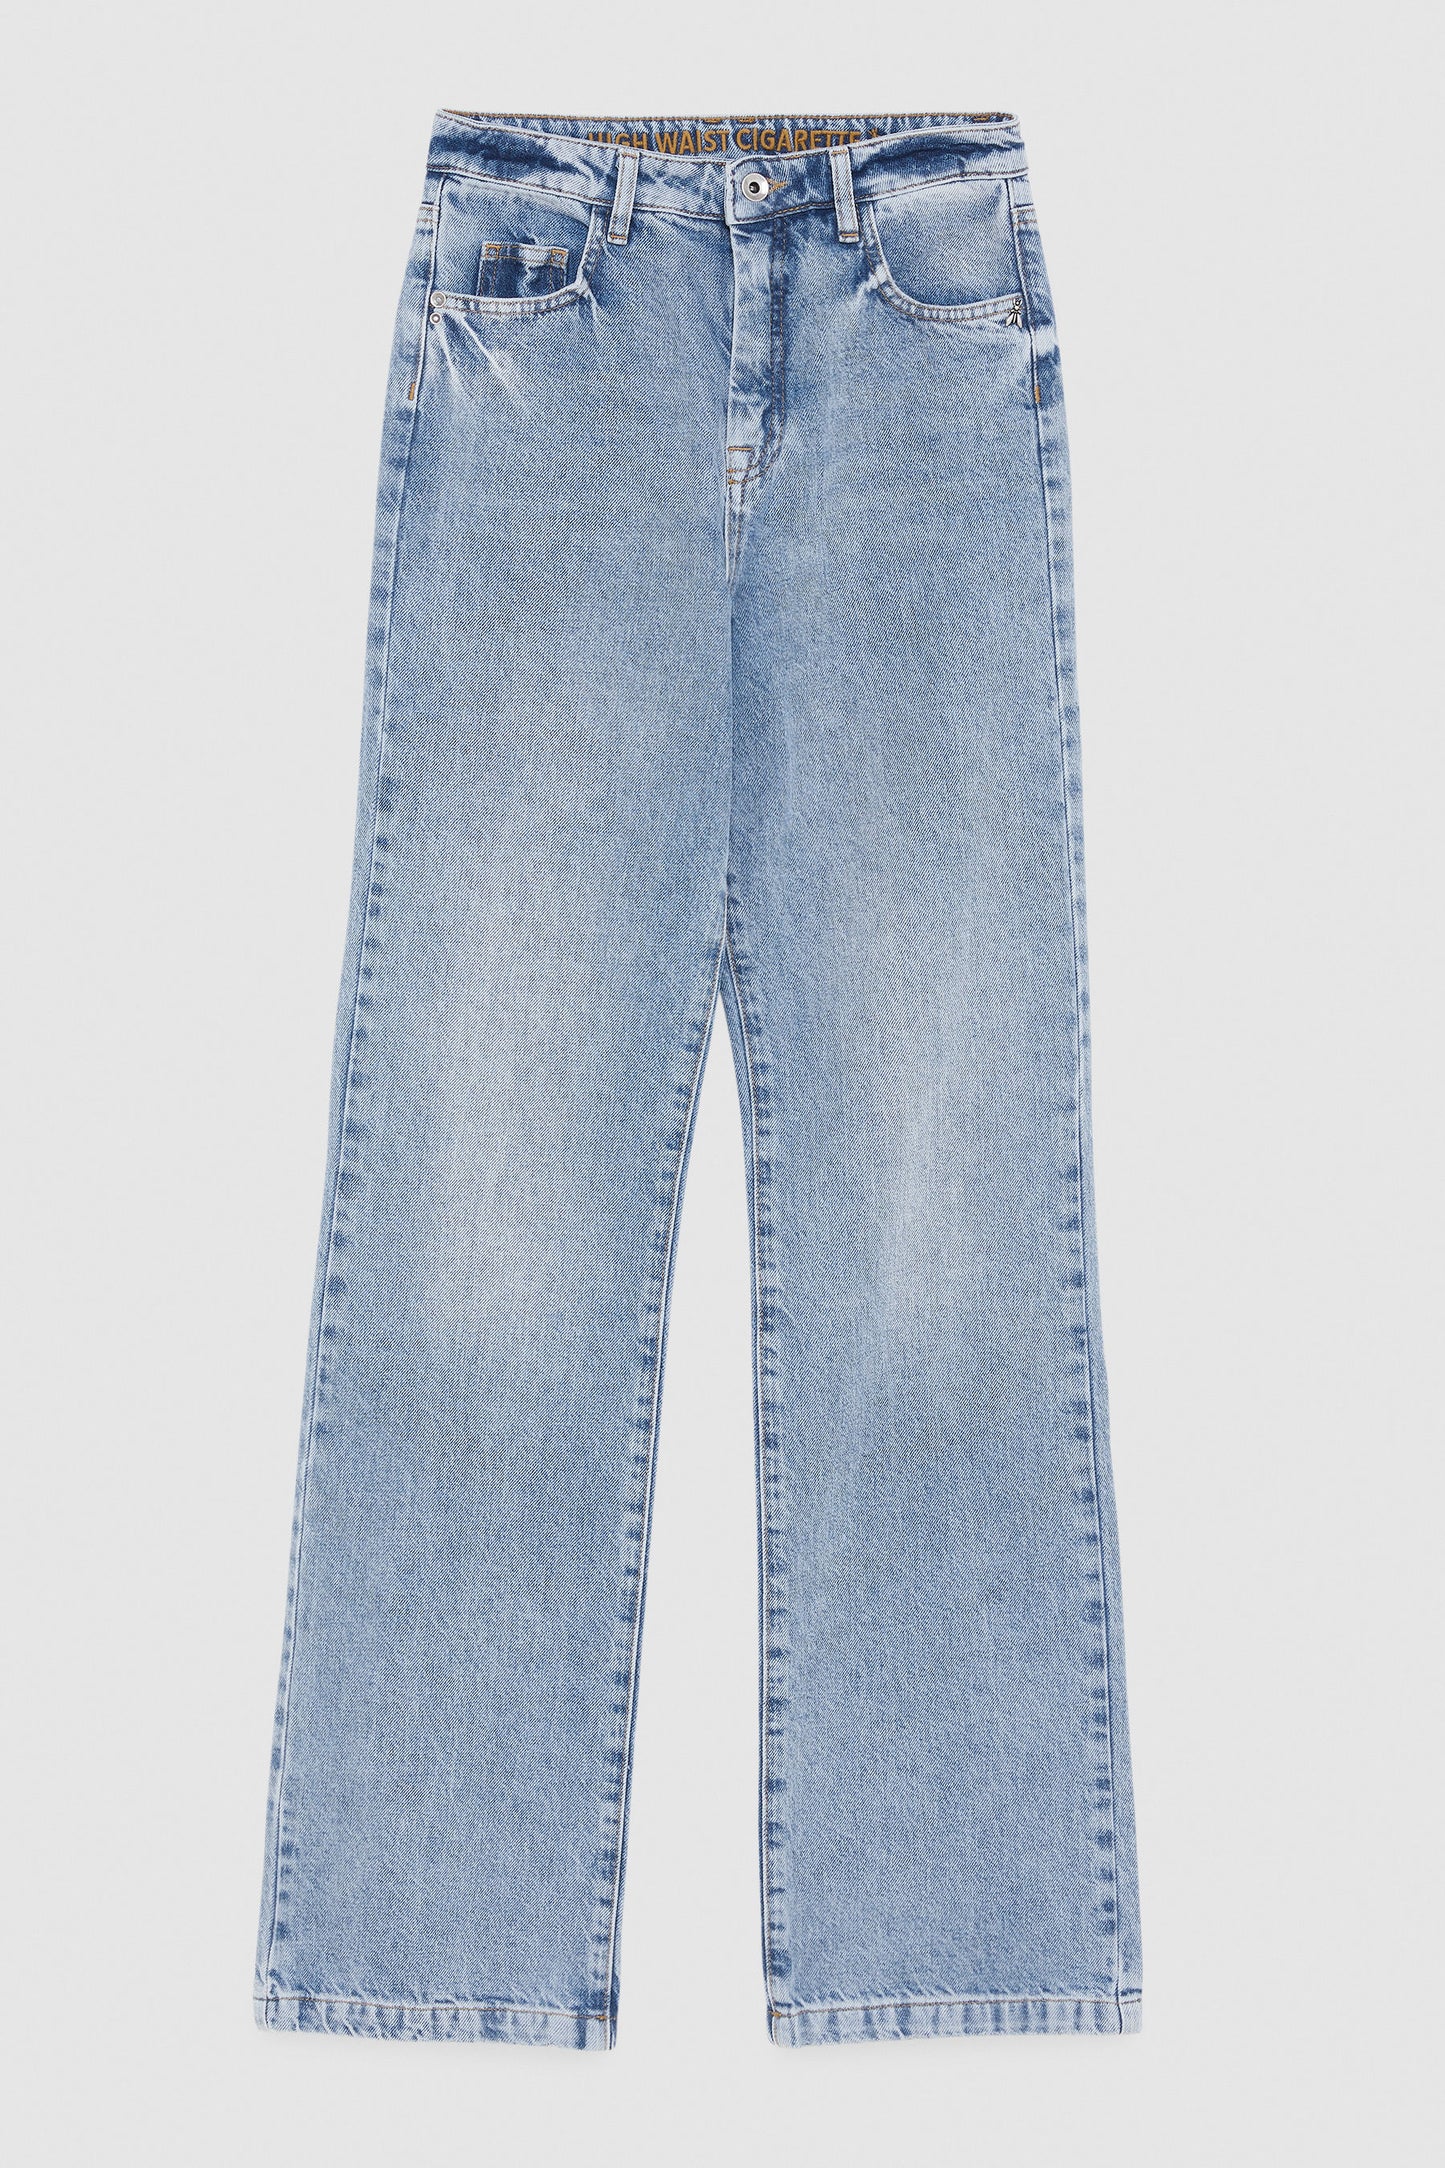 Essential Relaxed Fit Light Wash Jean